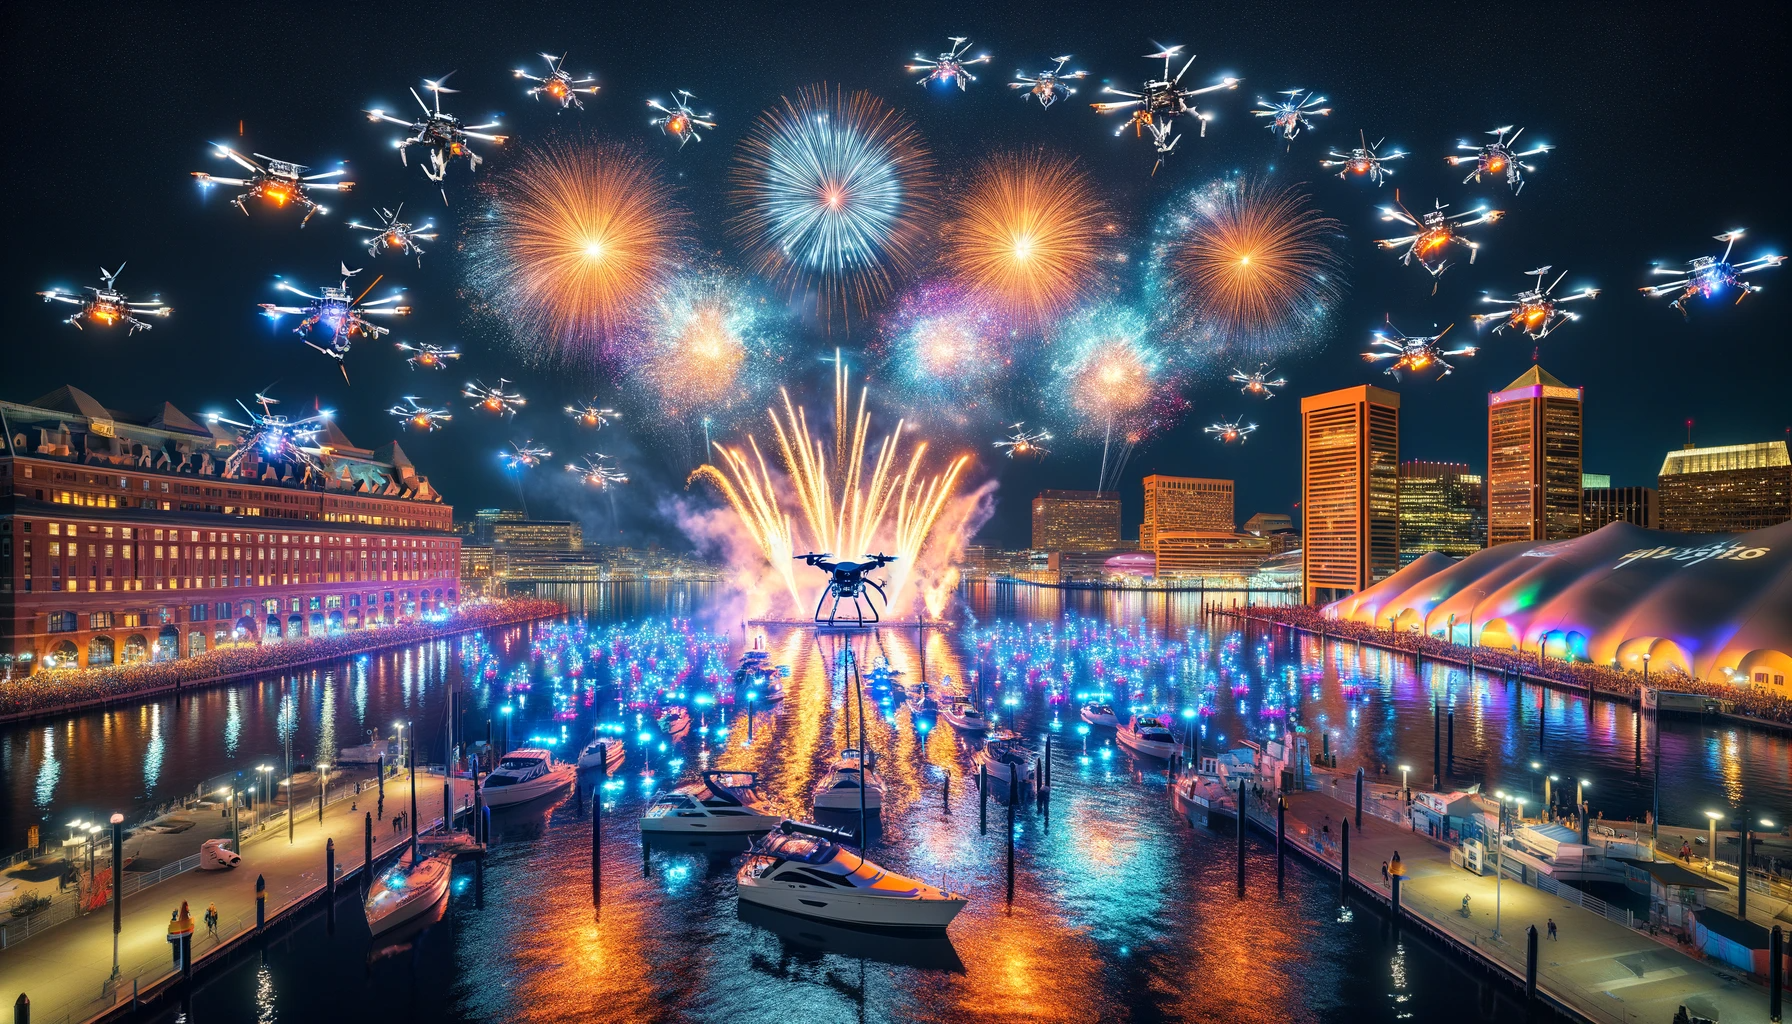 Baltimore's new year's eve fireworks and drone show.